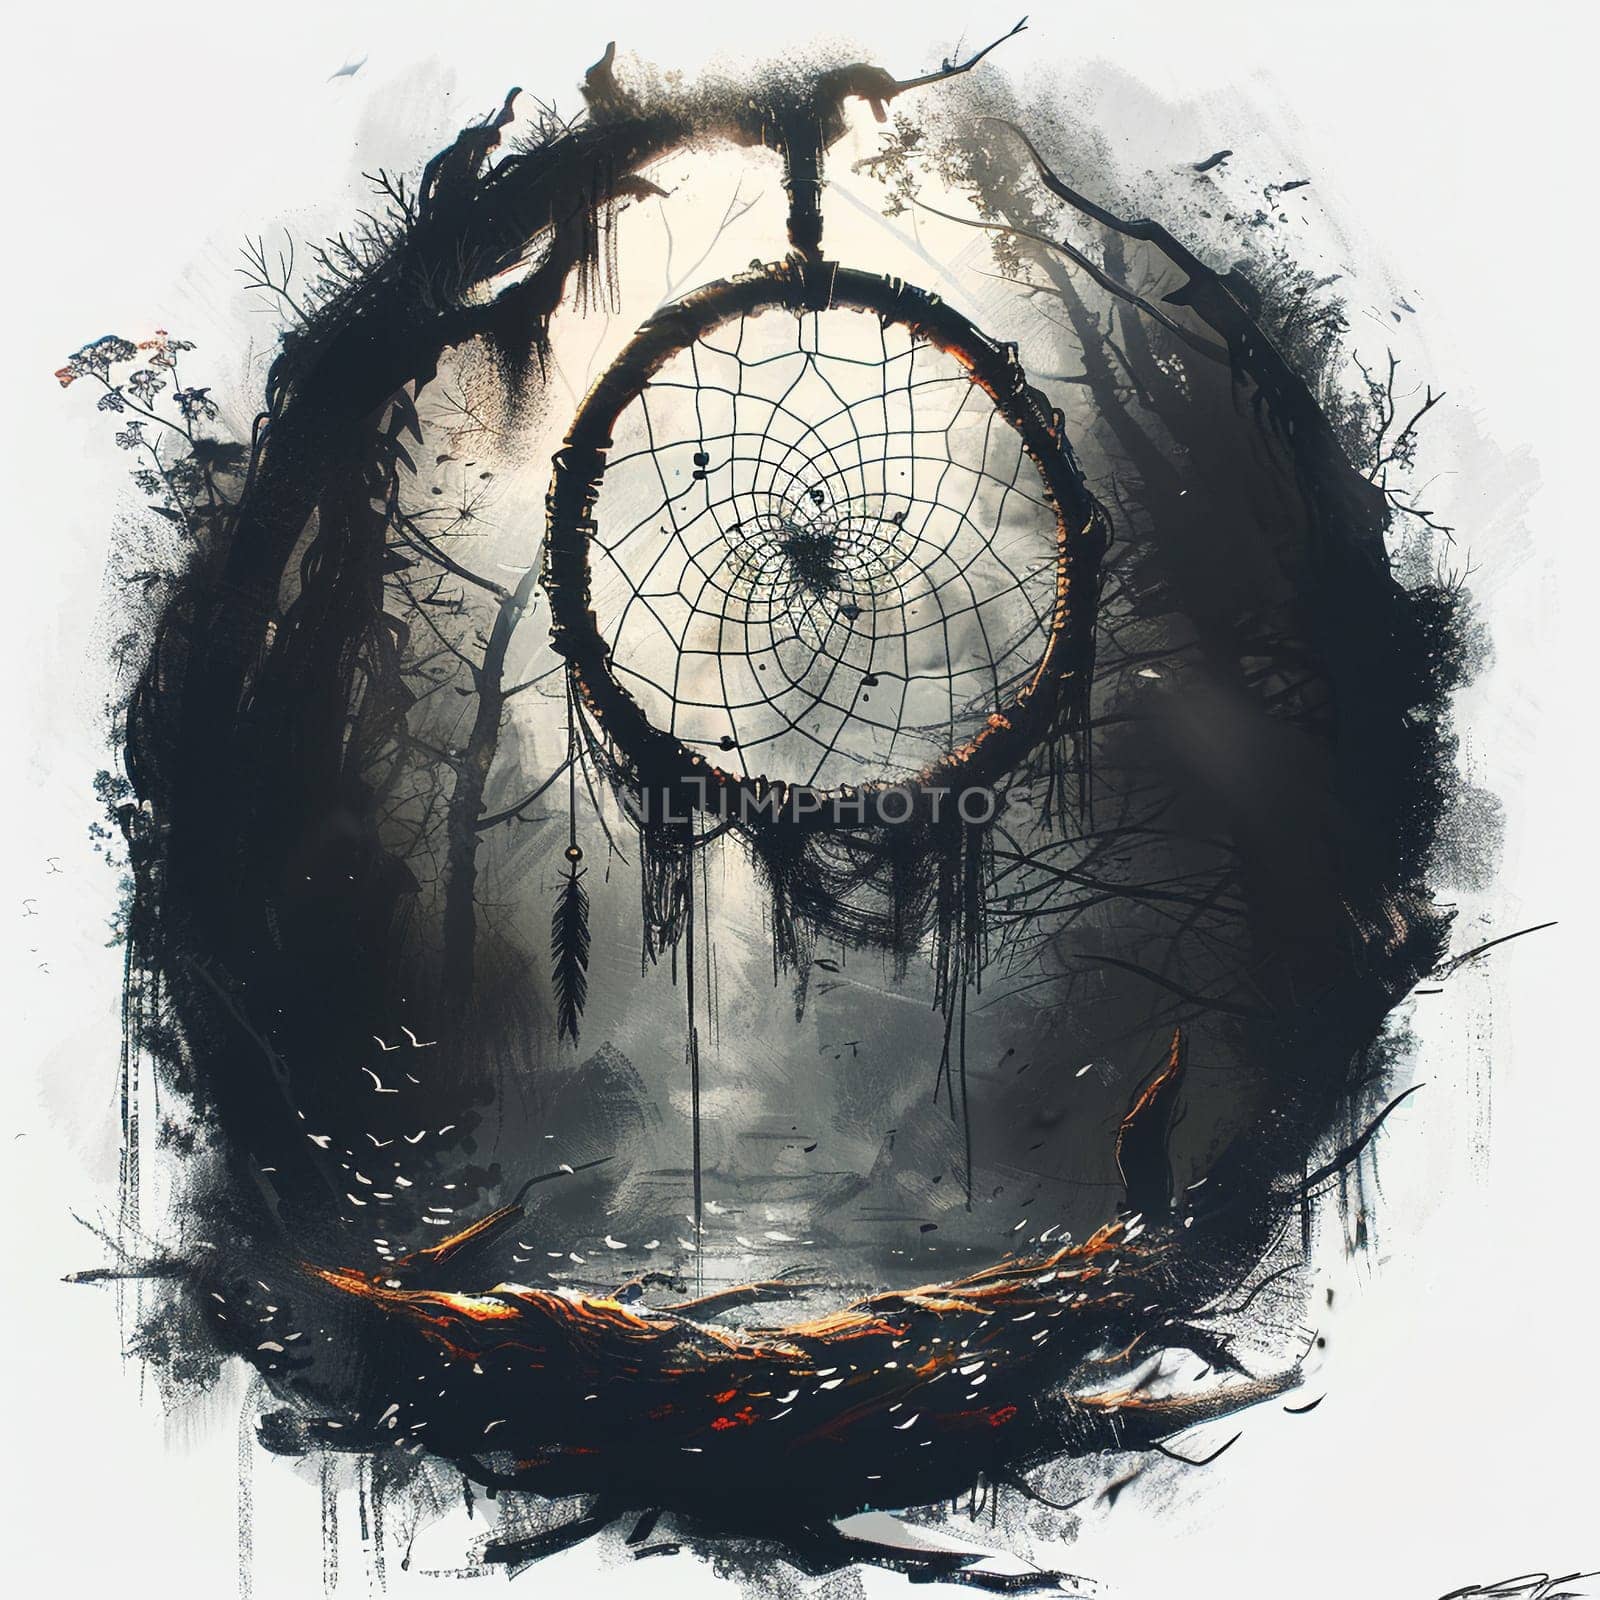 Fantasy concept sketch of dreamcatcher netting bad dreams for World Sleep Day